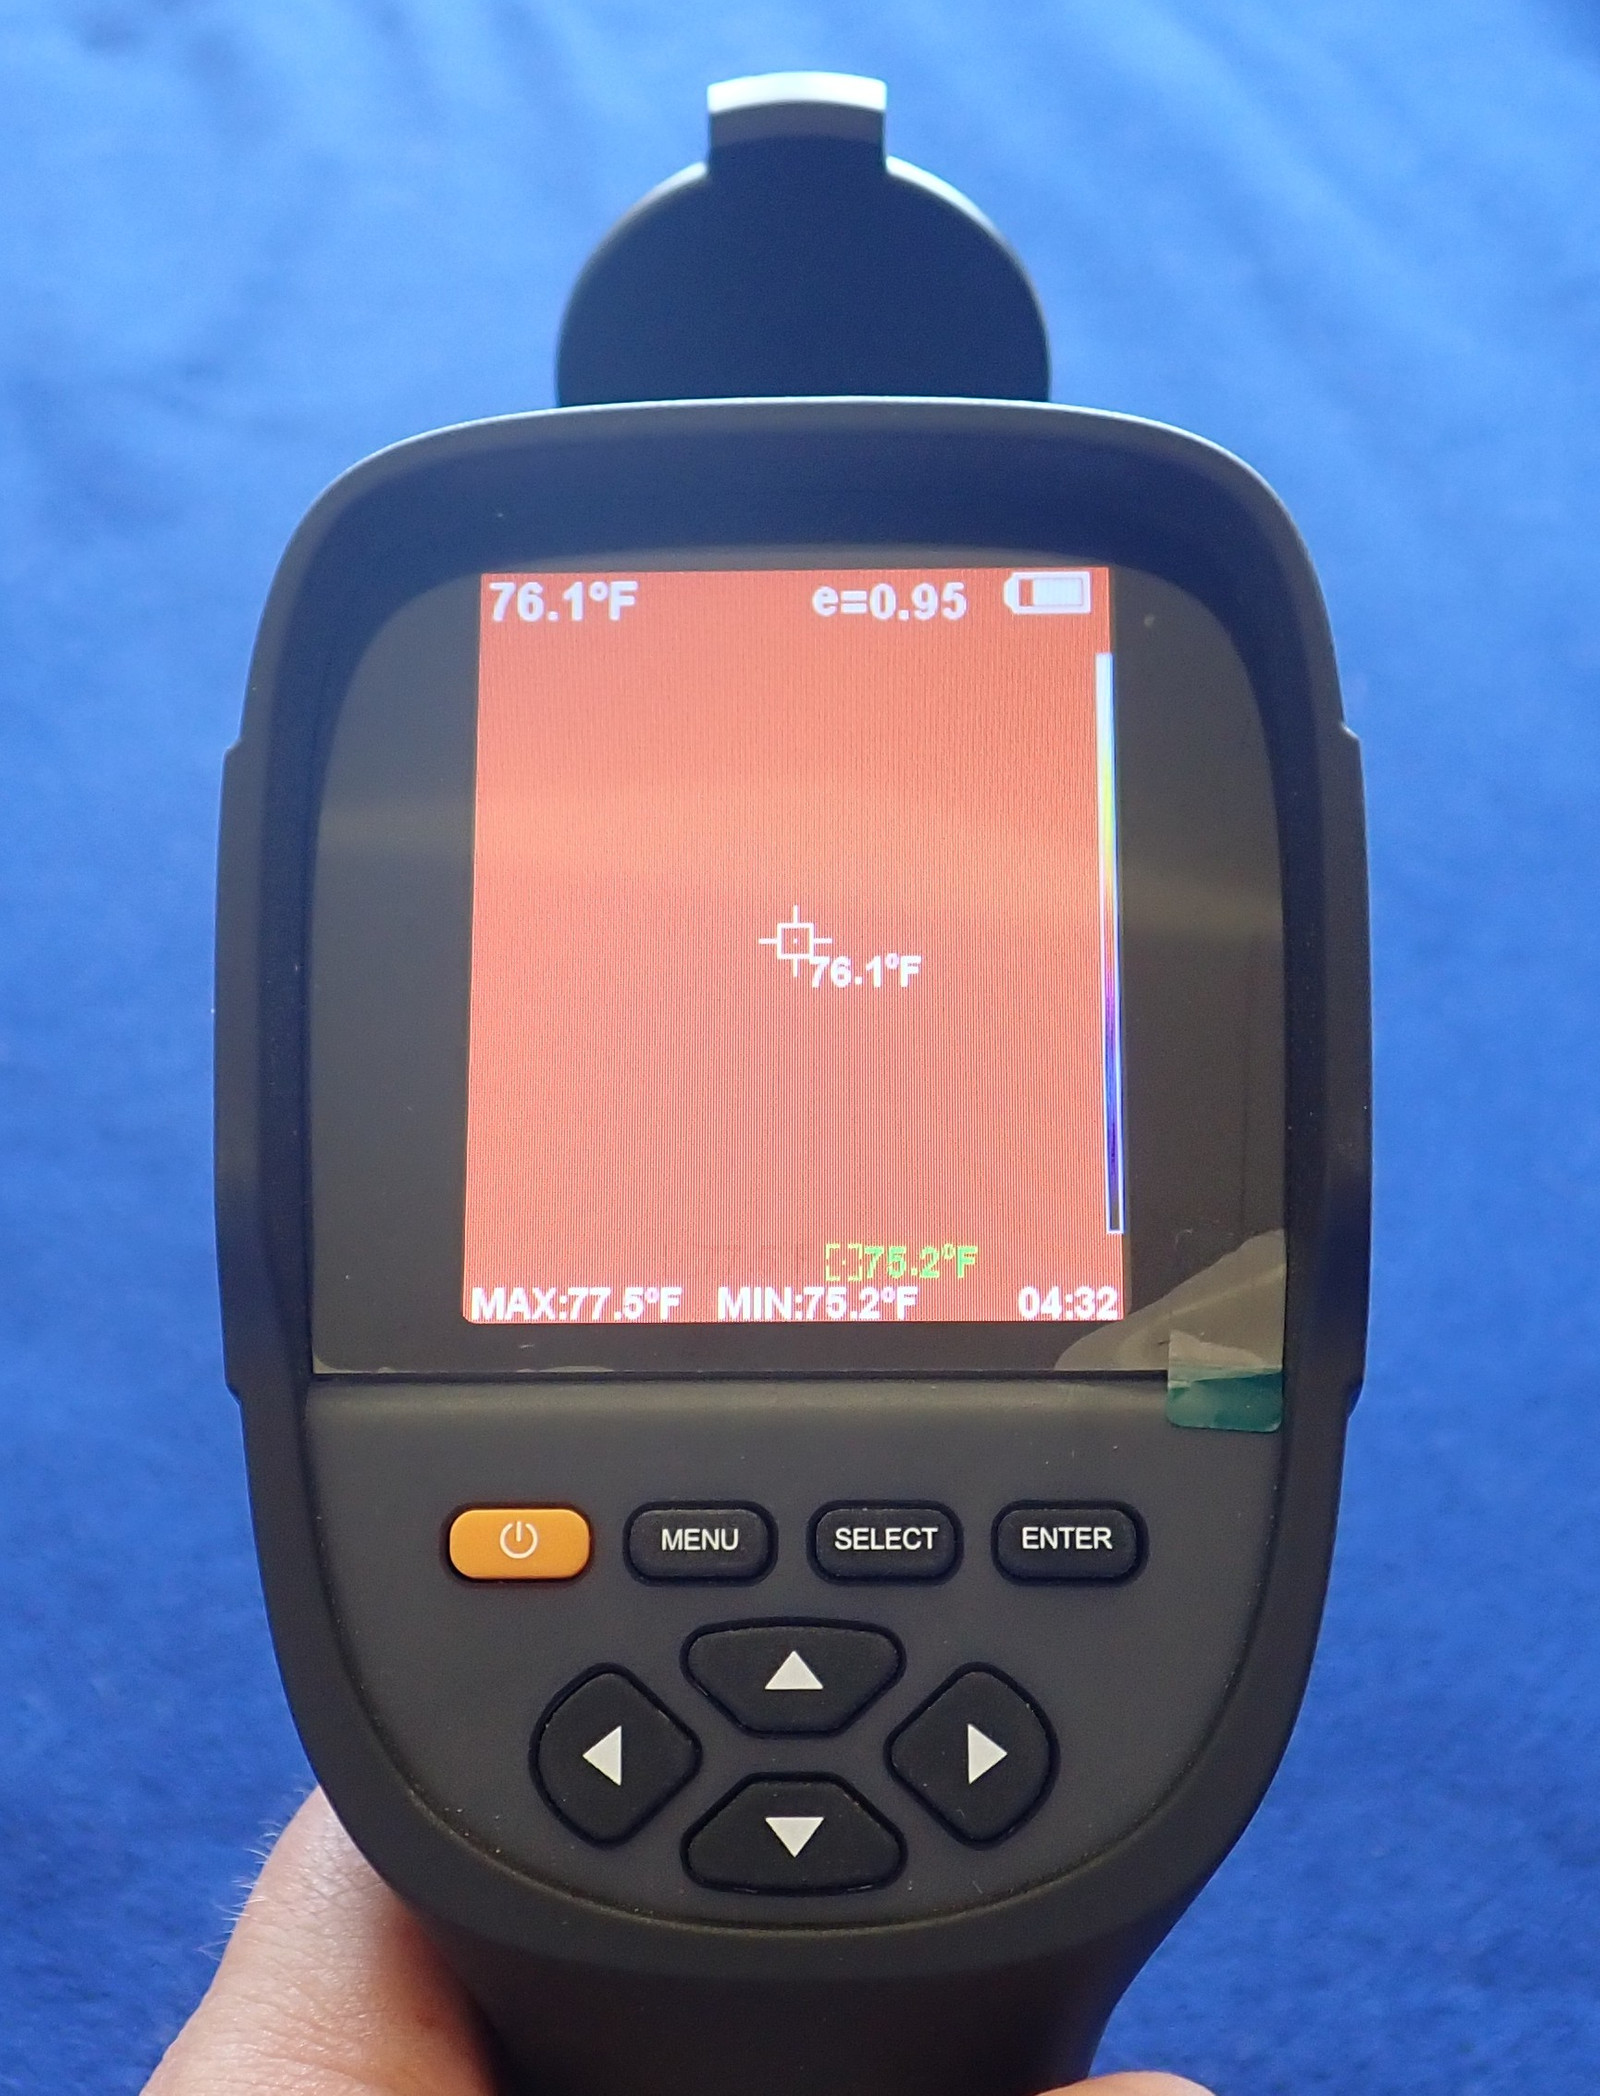 Water Leakage Detection Of Infrared Thermal Imaging Camera Ht-19